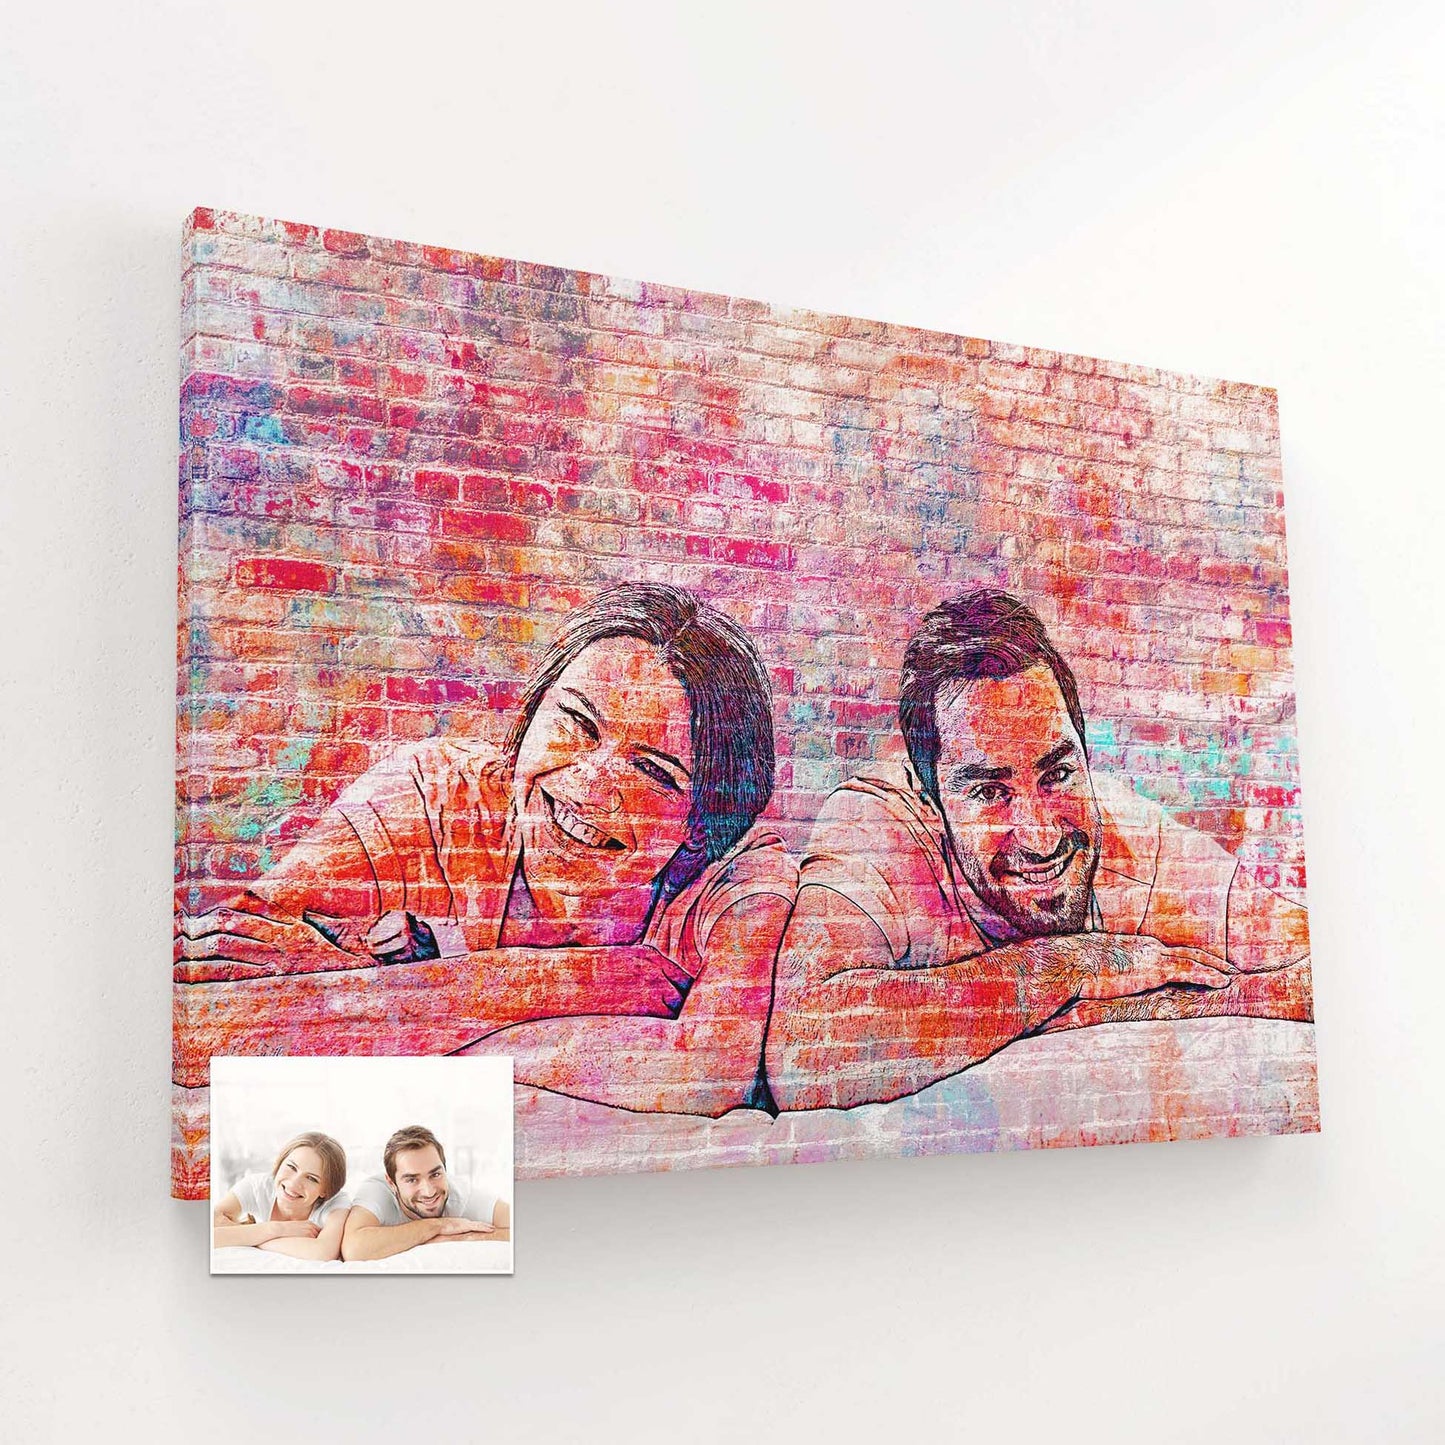 Wall Art from Photo - Personalised Brick Graffiti Street Art Canvas - Add a touch of urban style to your home with this unique and inspired artwork. The artistic graffiti design on a brick background is a cool and vibrant addition 